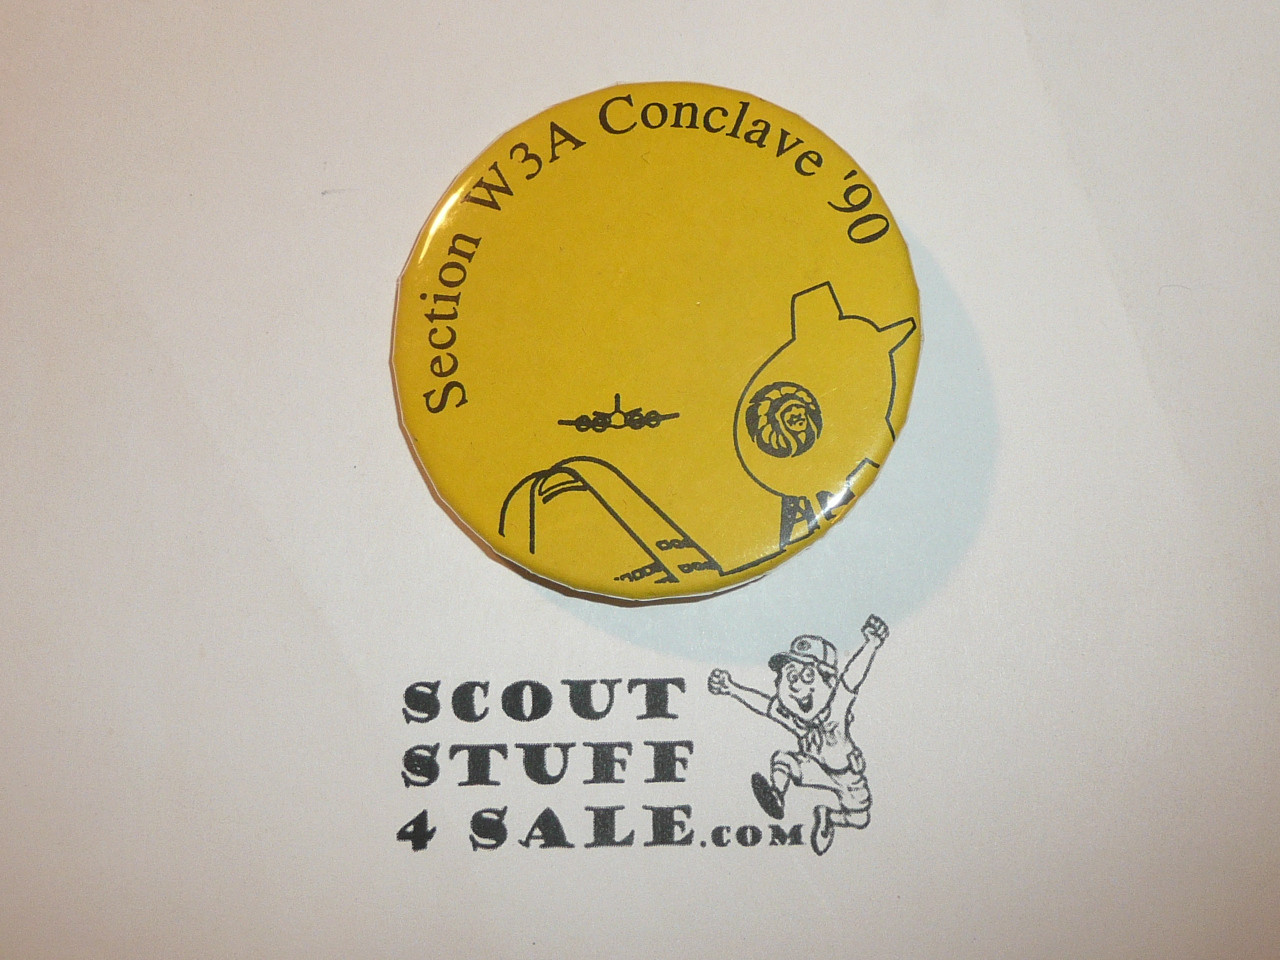 Section W3A 1990 O.A. Conclave Button - Scout